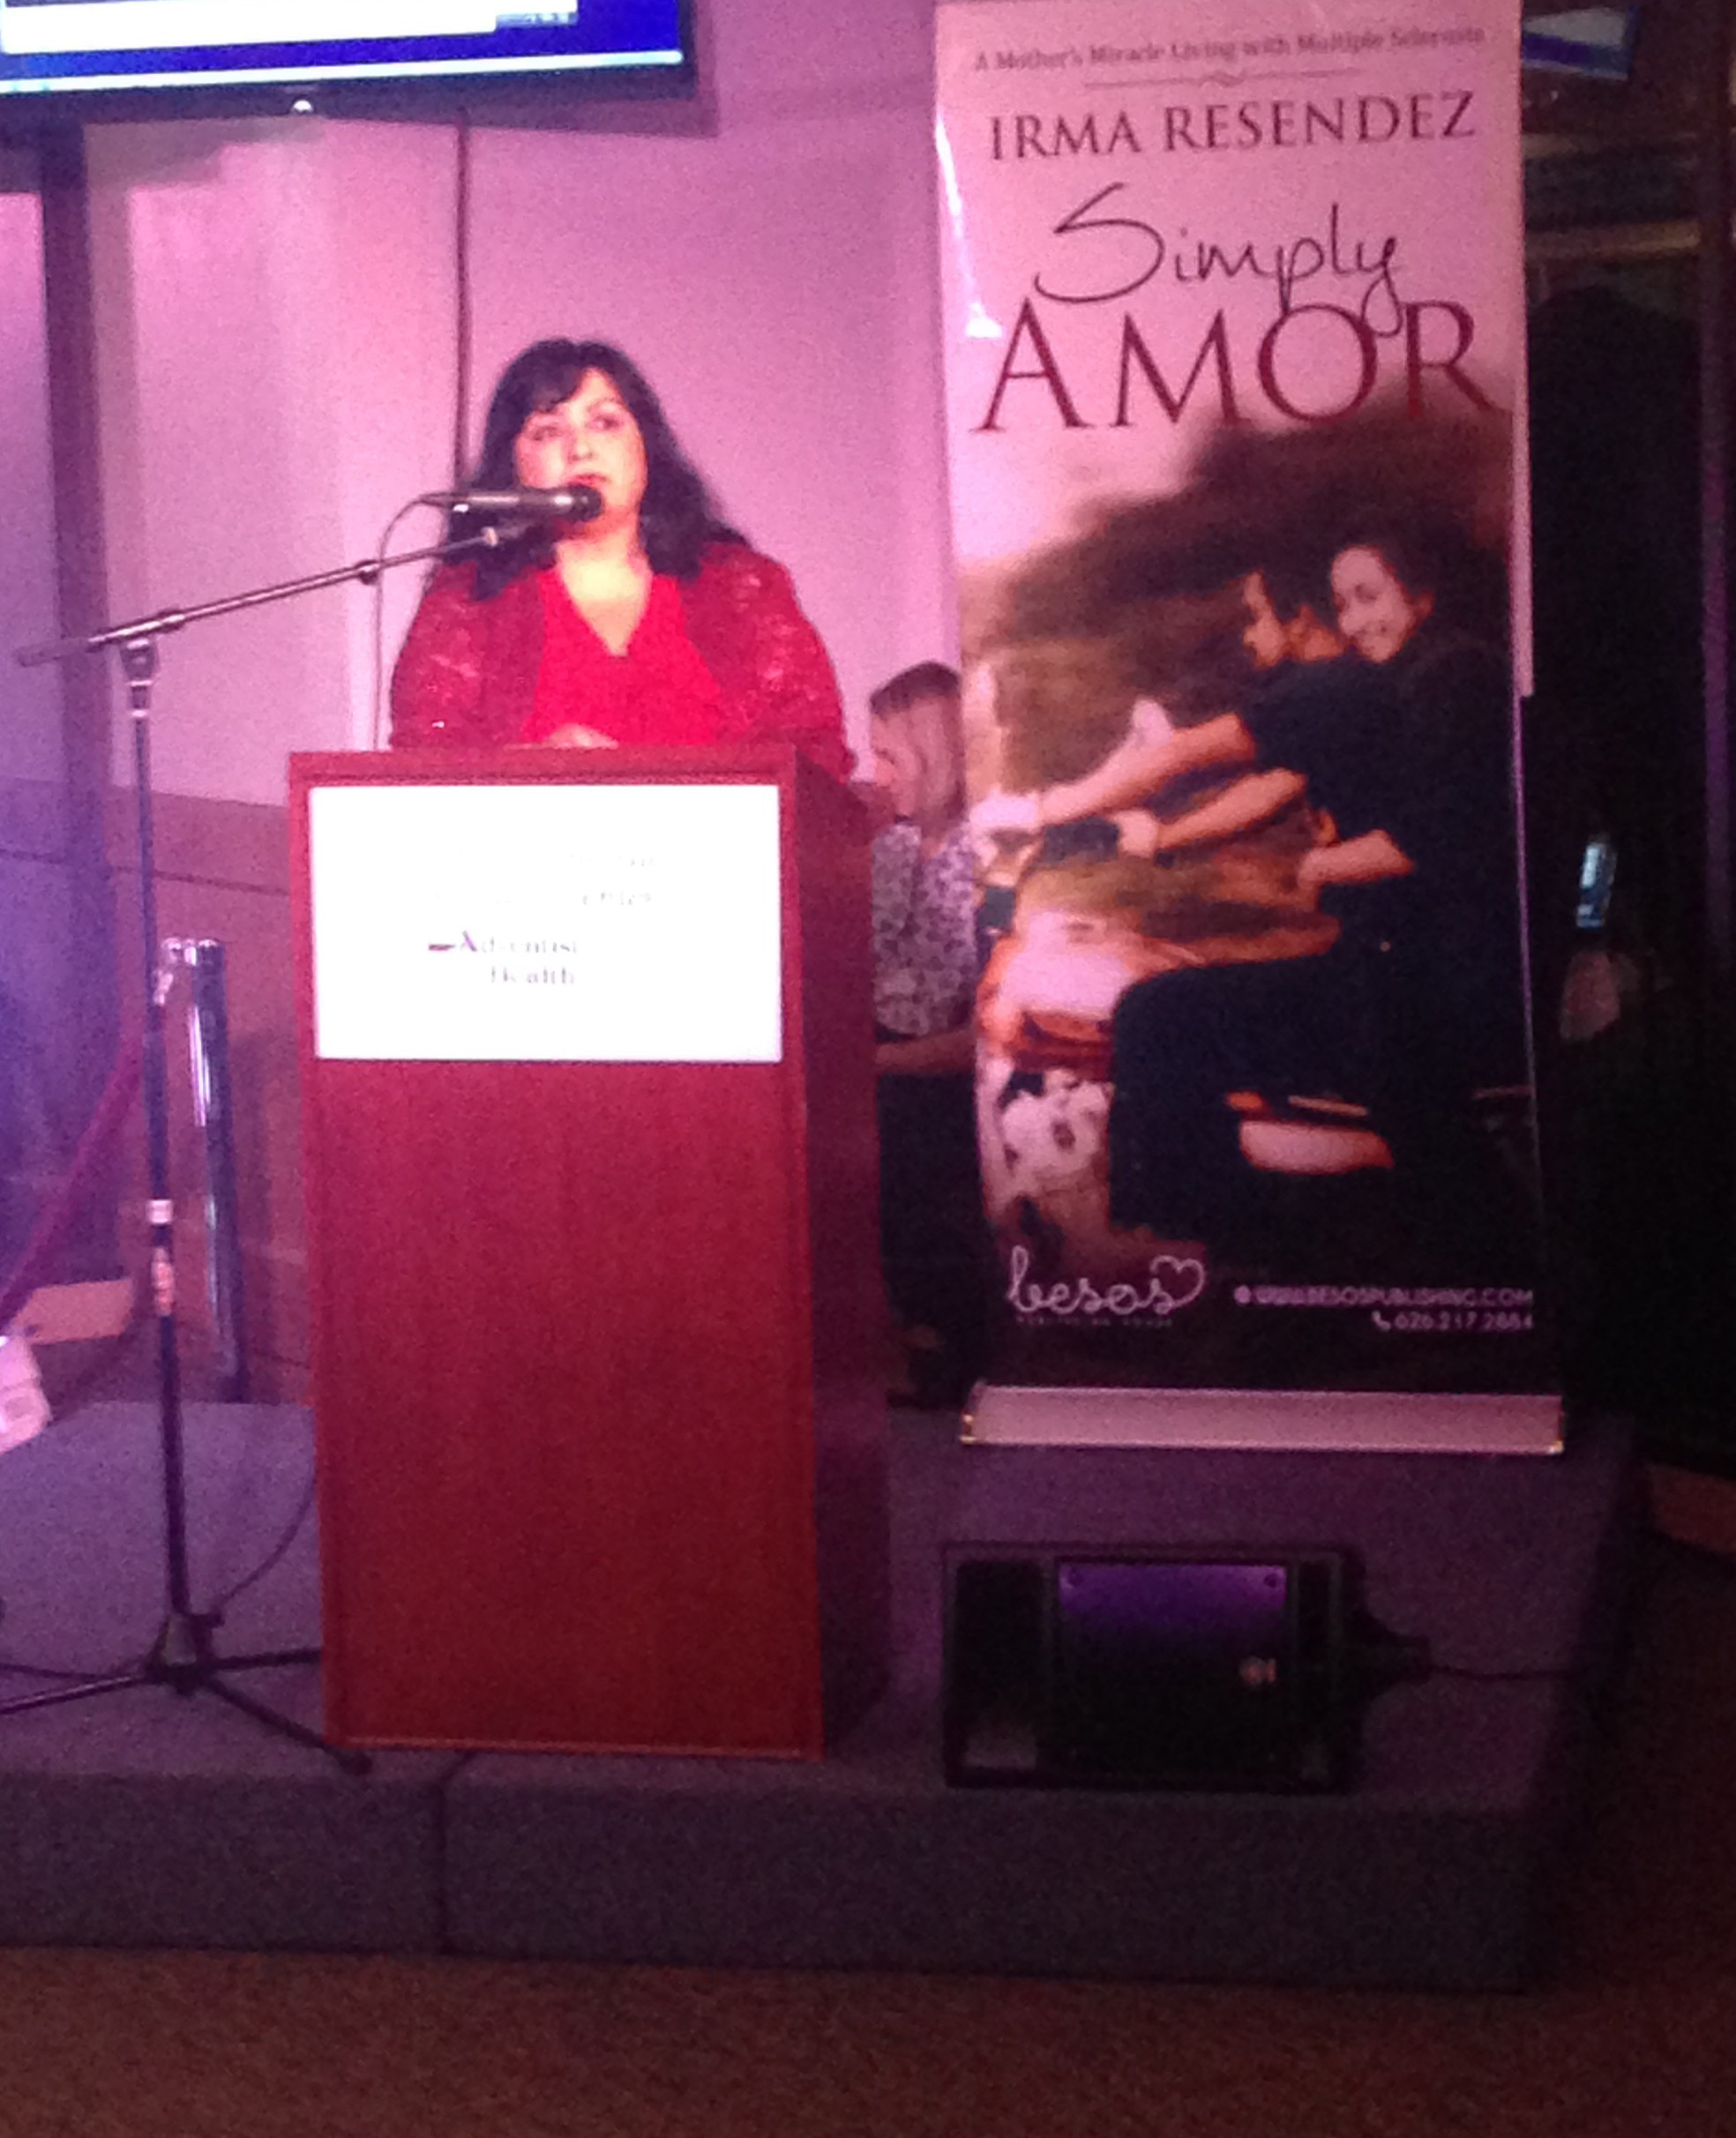 Founder Irma Resendez in 2014 at her Simply Amor book signing.